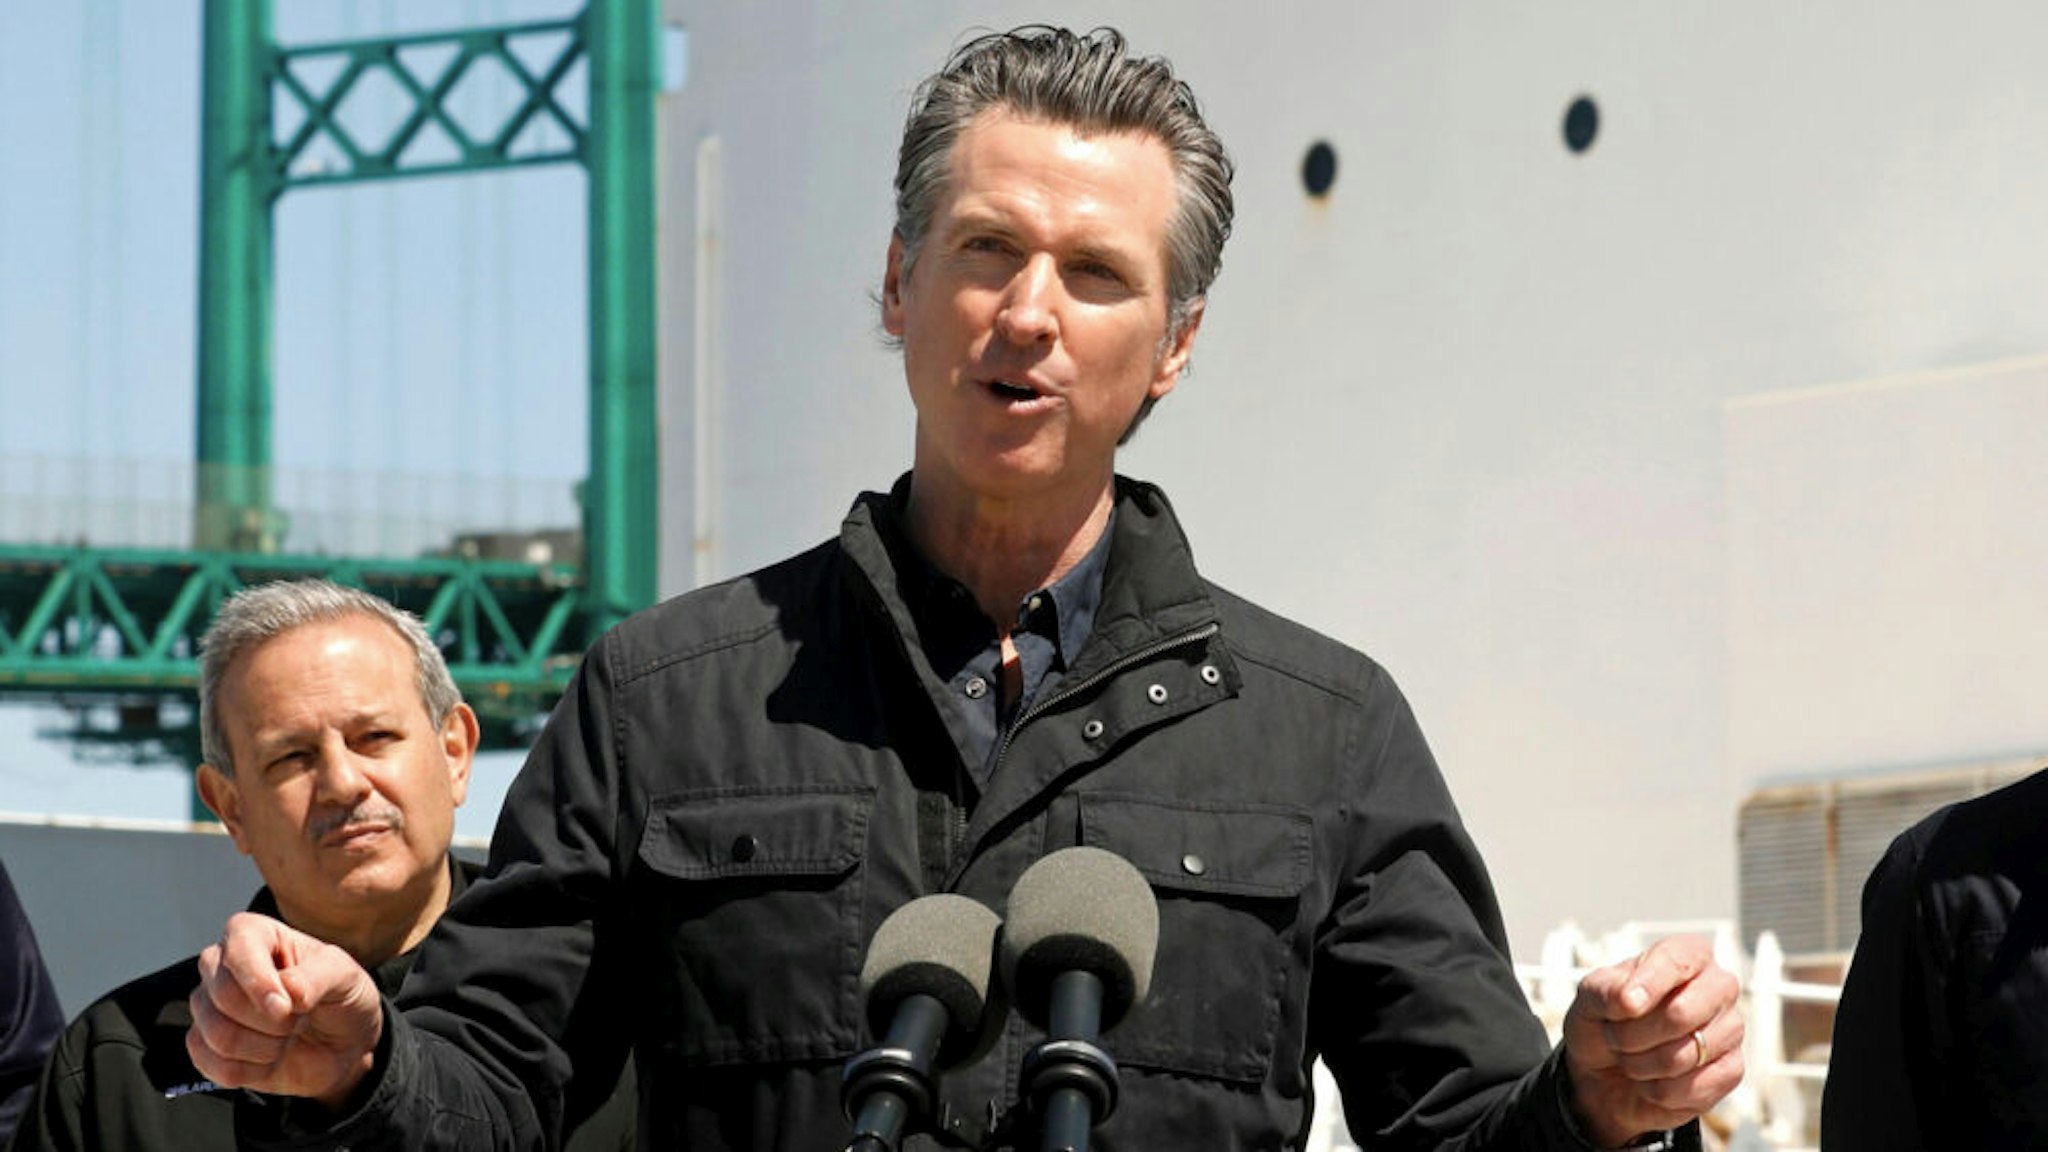 California Governor Gavin Newsom (C), flanked by (from L) Robert Fenton, FEMA Regional Administrator for Region 9, Director Mark Ghilarducci, Cal OES, and Los Angeles Mayor Eric Garcetti, speaks in front of the hospital ship USNS Mercy after it arrived into the Port of Los Angeles on March 27, 2020. - The USNS Mercy, a giant US naval hospital ship, arrived in Los Angeles on March 27, where it will be used to ease the strain on the city's coronavirus-swamped emergency rooms.